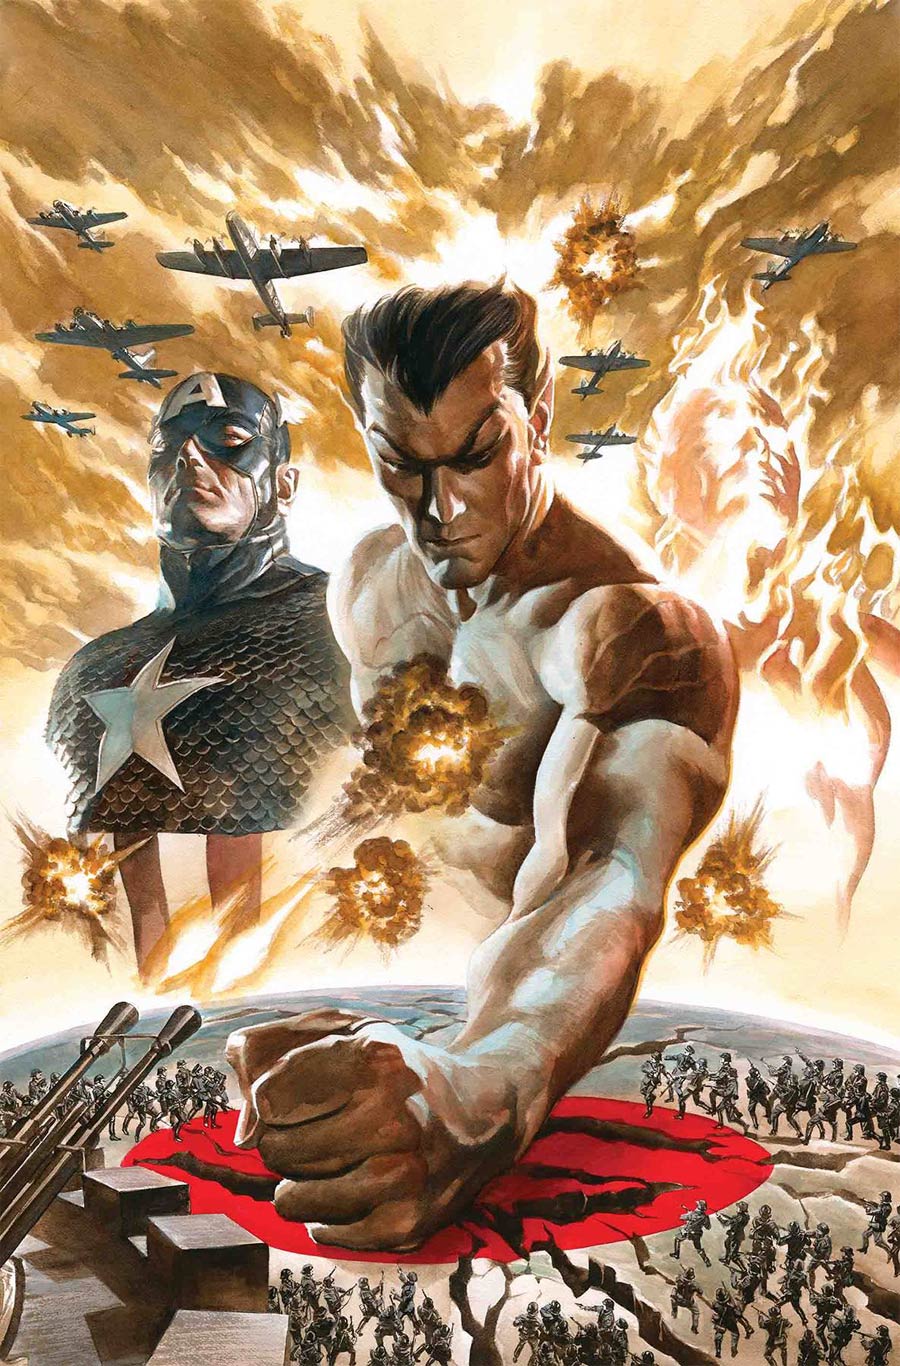 Invaders Vol 3 #1 By Alex Ross Poster